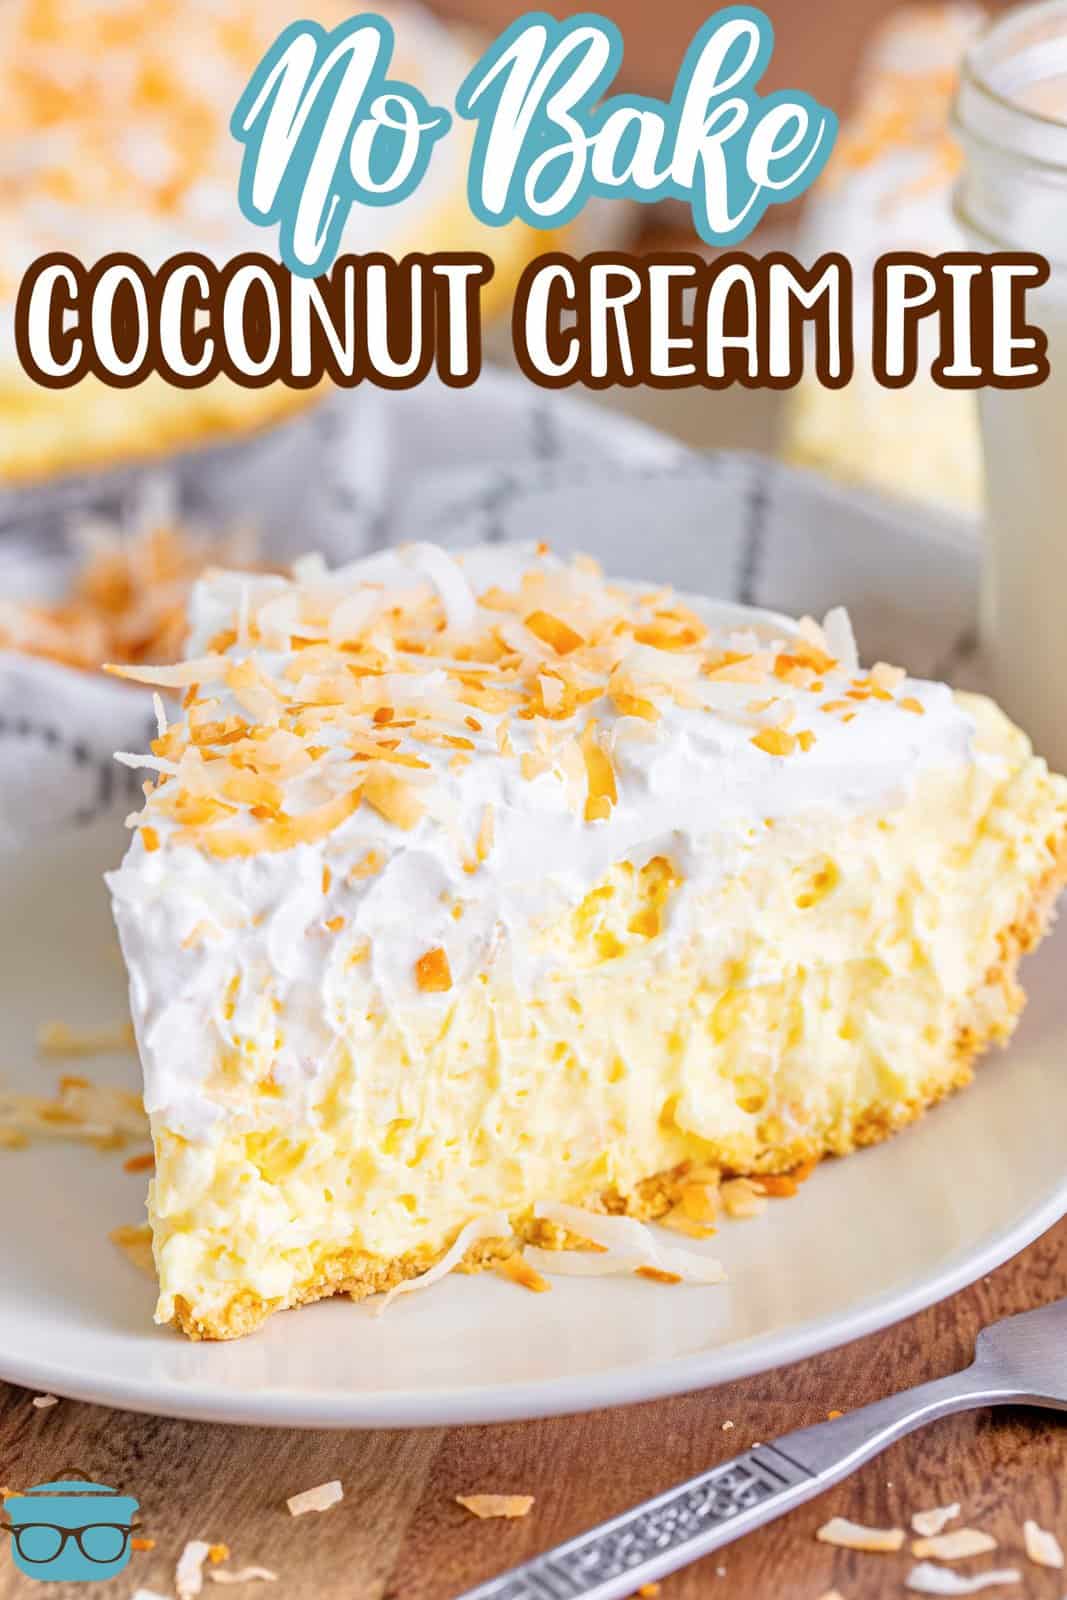 Slice of coconut cream pie on a plate.